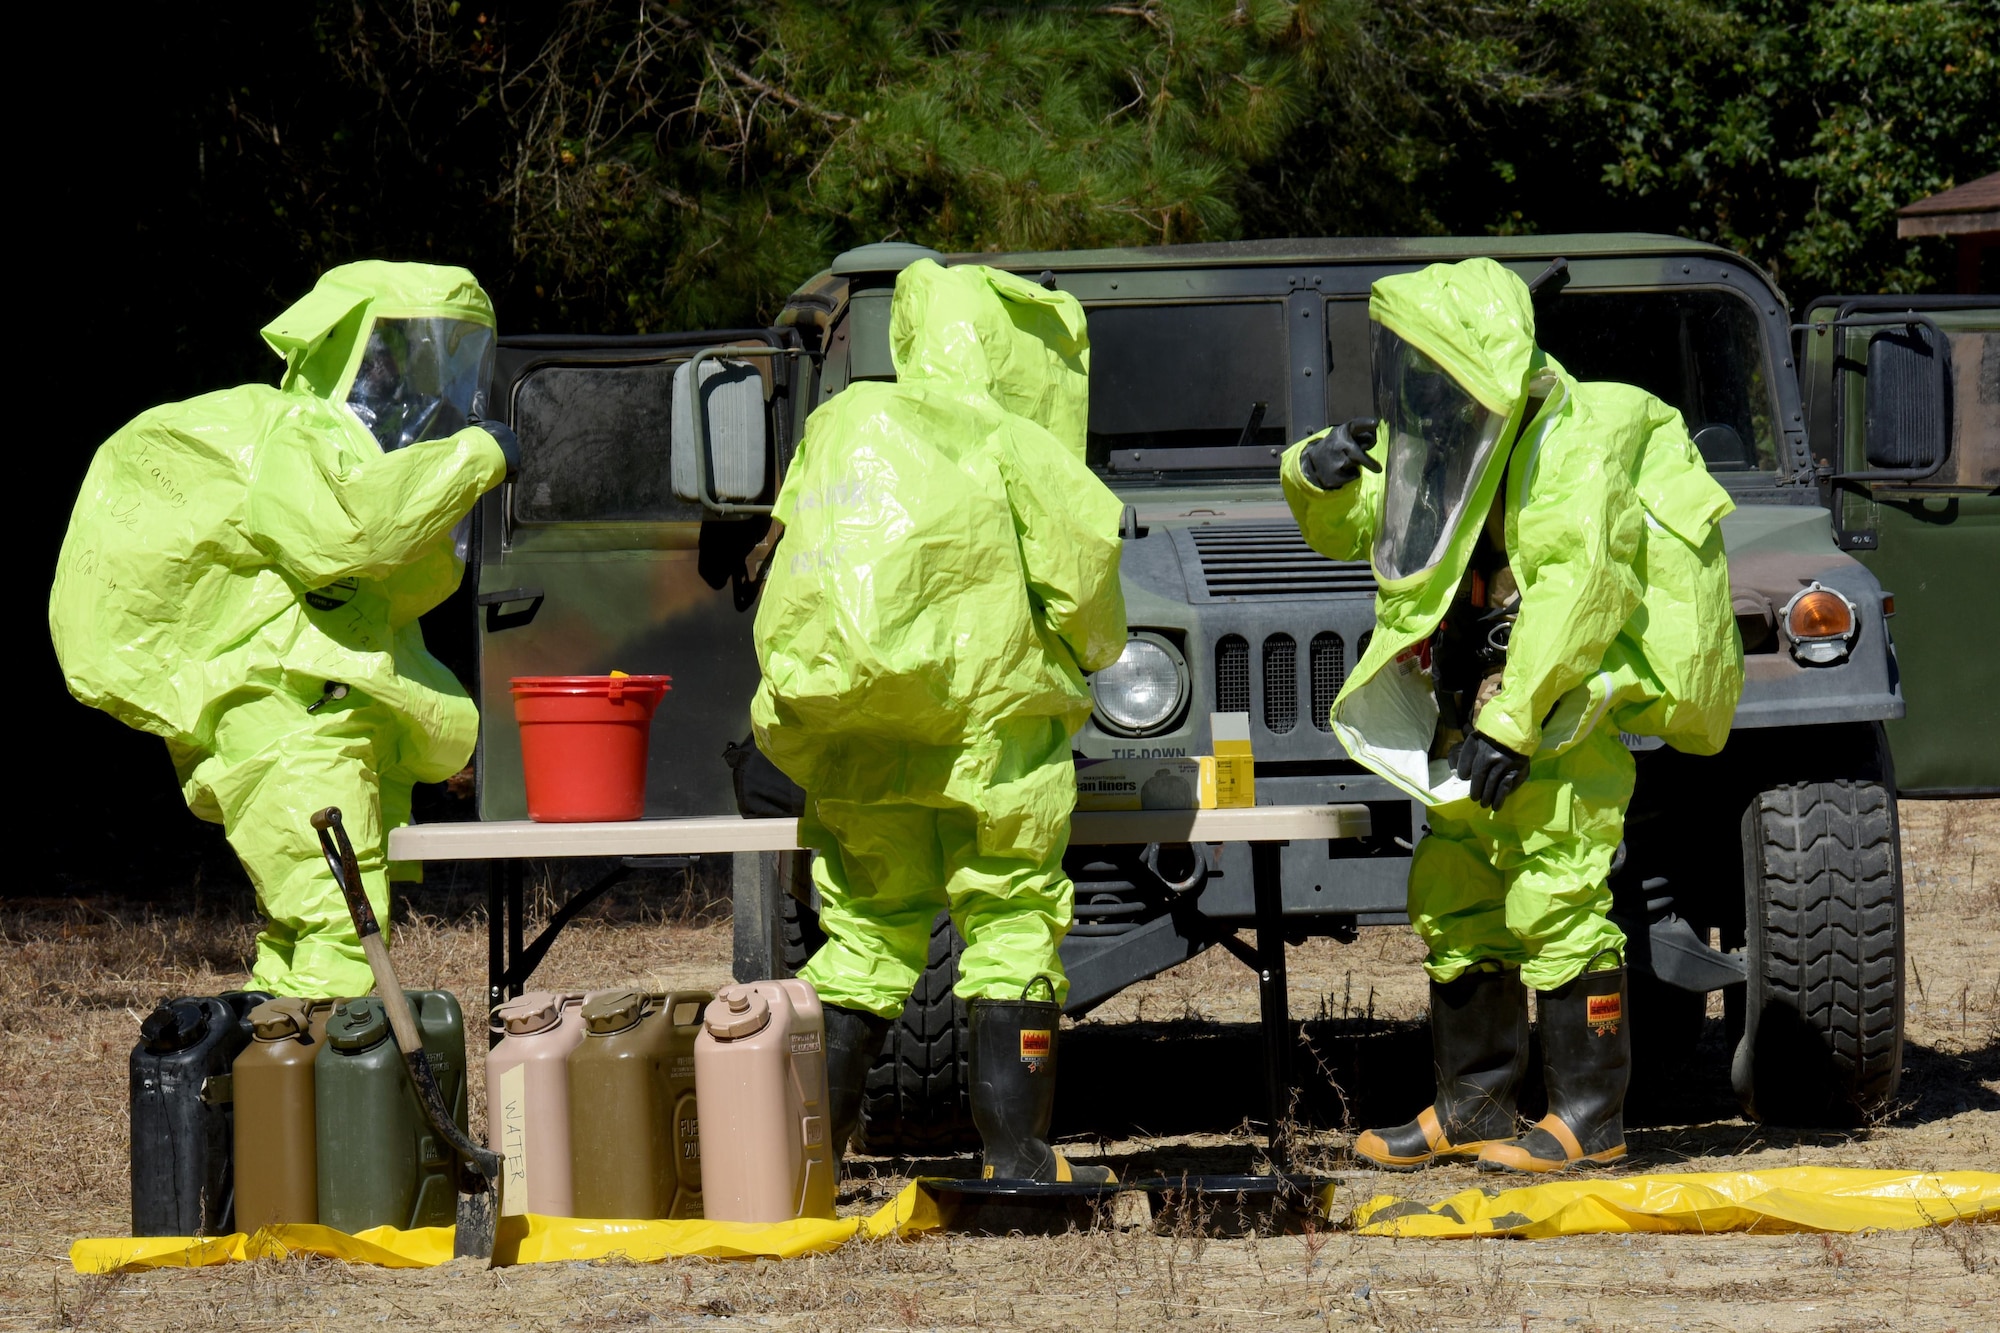 Three explosive ordnance disposal technicians from the 4th Civil Engineer Squadron, simulate a chemical spill and cleanup during a three-day EOD exercise, Sept. 15, 2016, on the EOD range at Seymour Johnson Air Force Base, North Carolina. The last day of the three-day exercise focused on chemical, biological, radiological and nuclear defense training. (U.S. Air Force photo by Airman Miranda A. Loera)